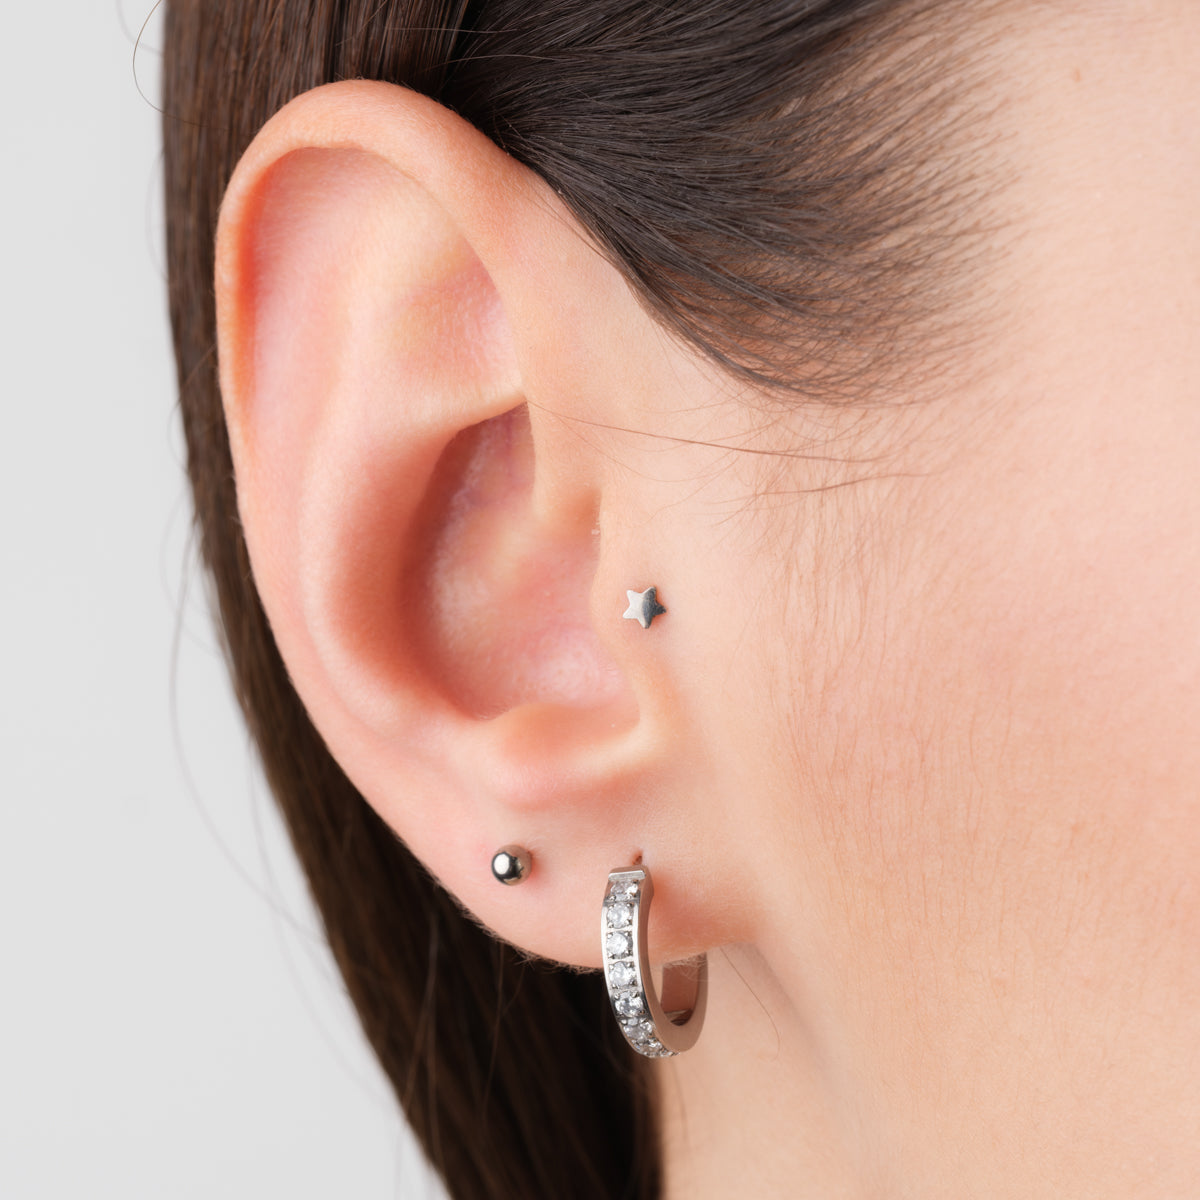 Star Titanium Helix Earring - Simply Whispers